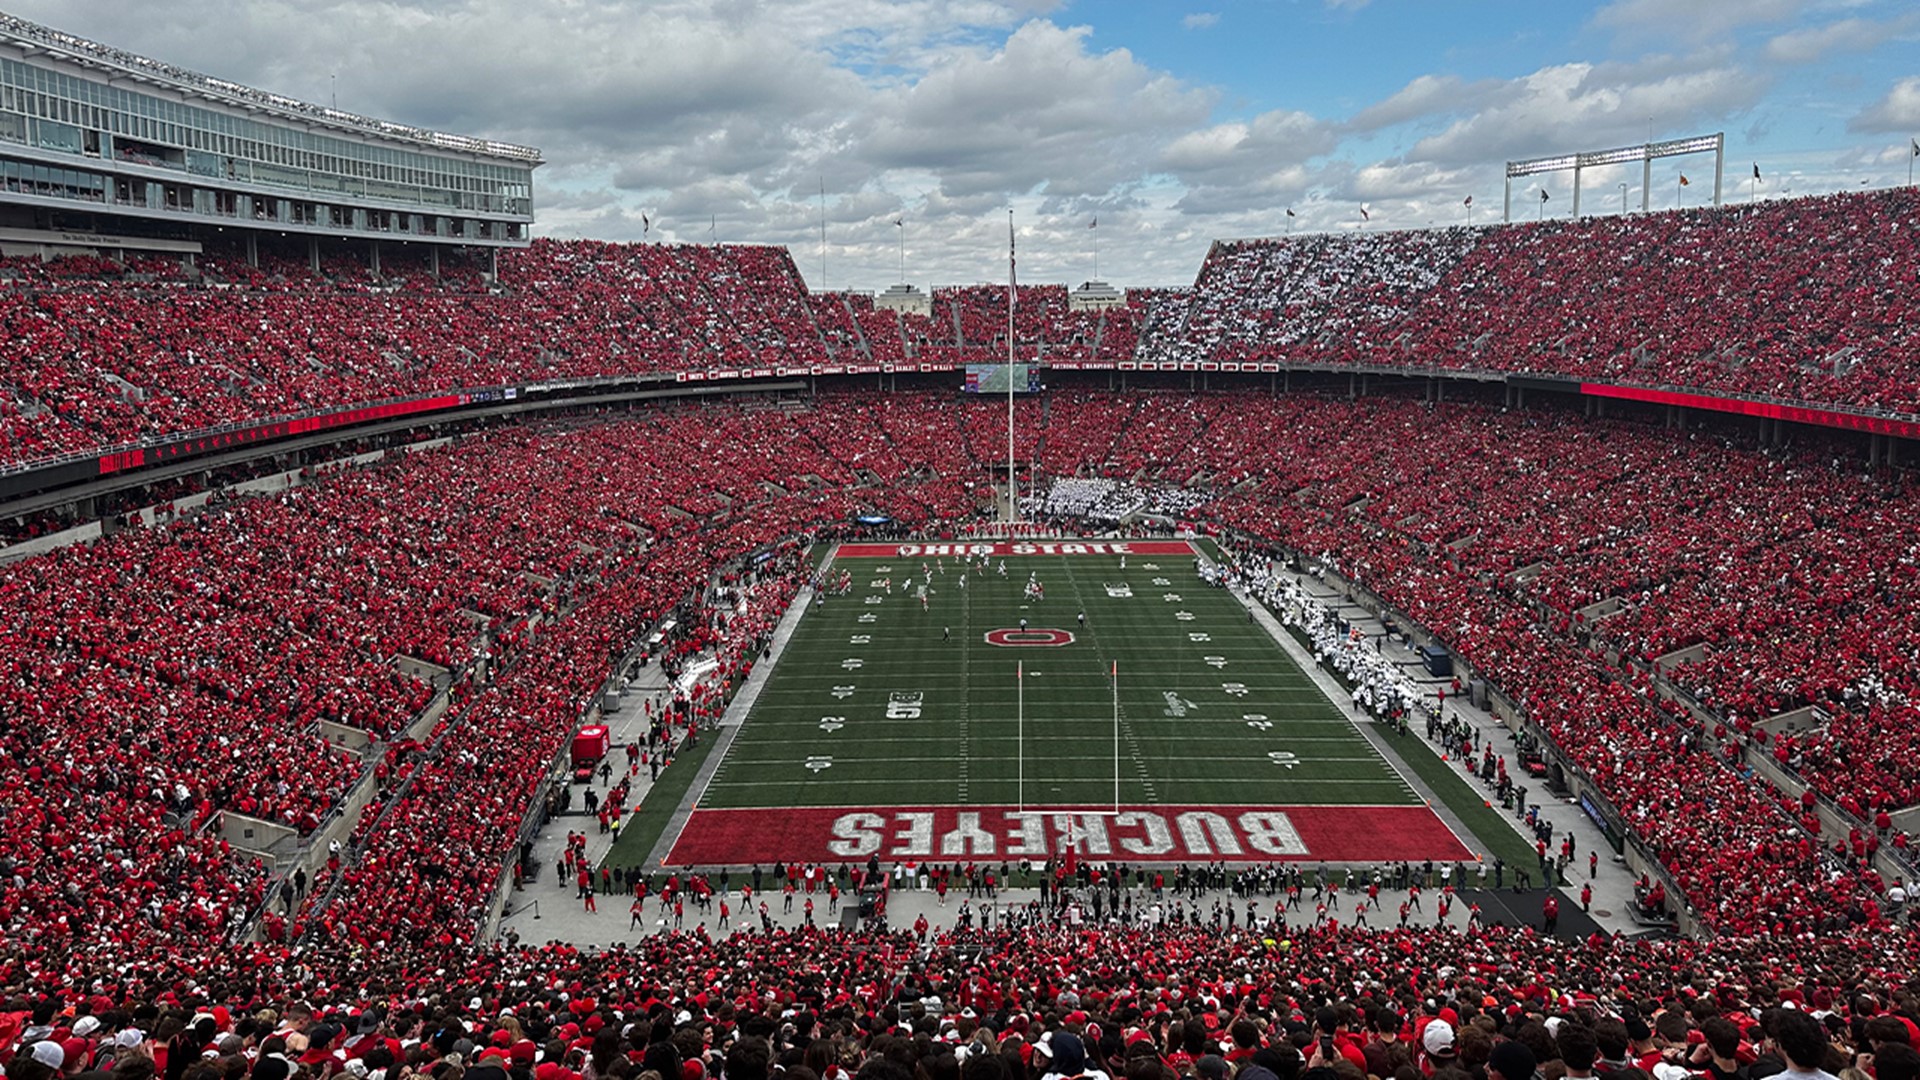 The Buckeyes will have eight home games next year, beginning with Southern Mississippi on Aug. 31.